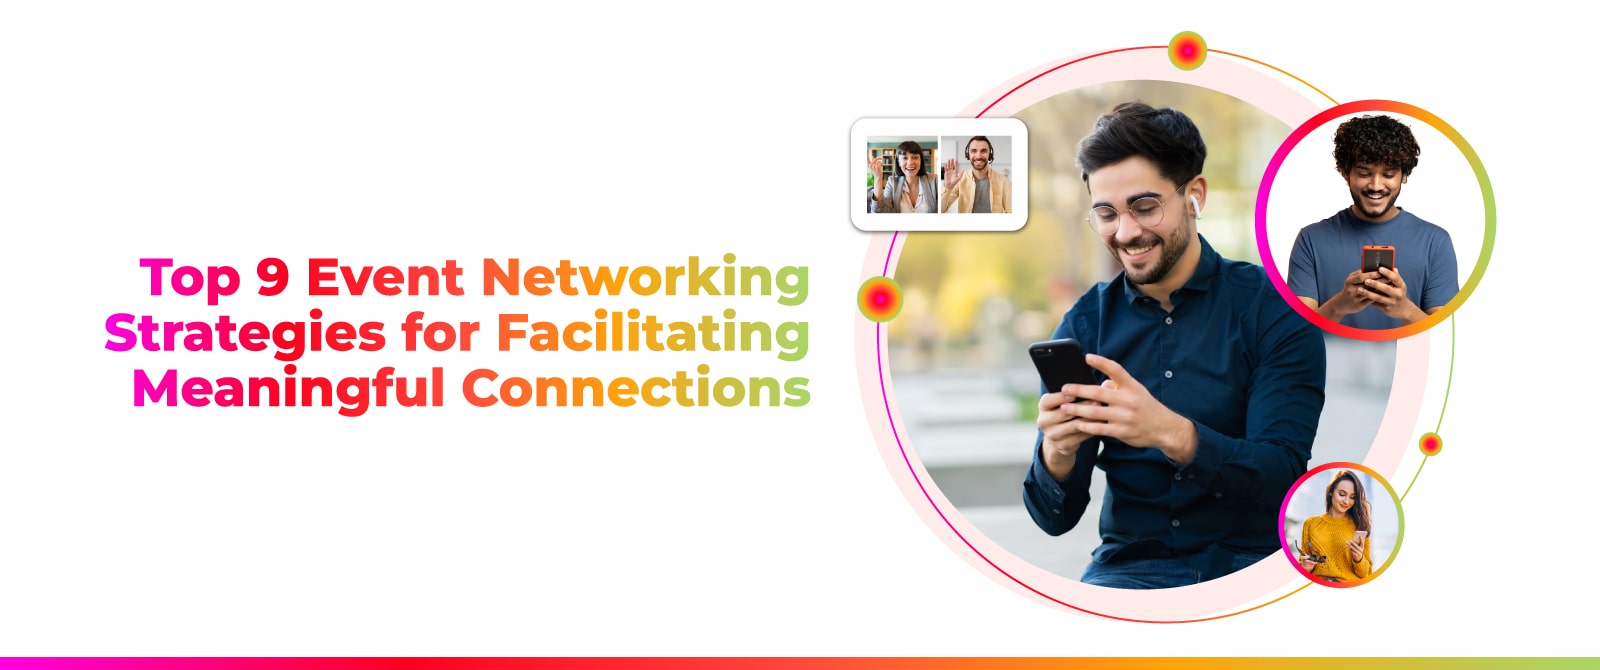 Top 9 Event Networking Strategies for Facilitating Meaningful Connections